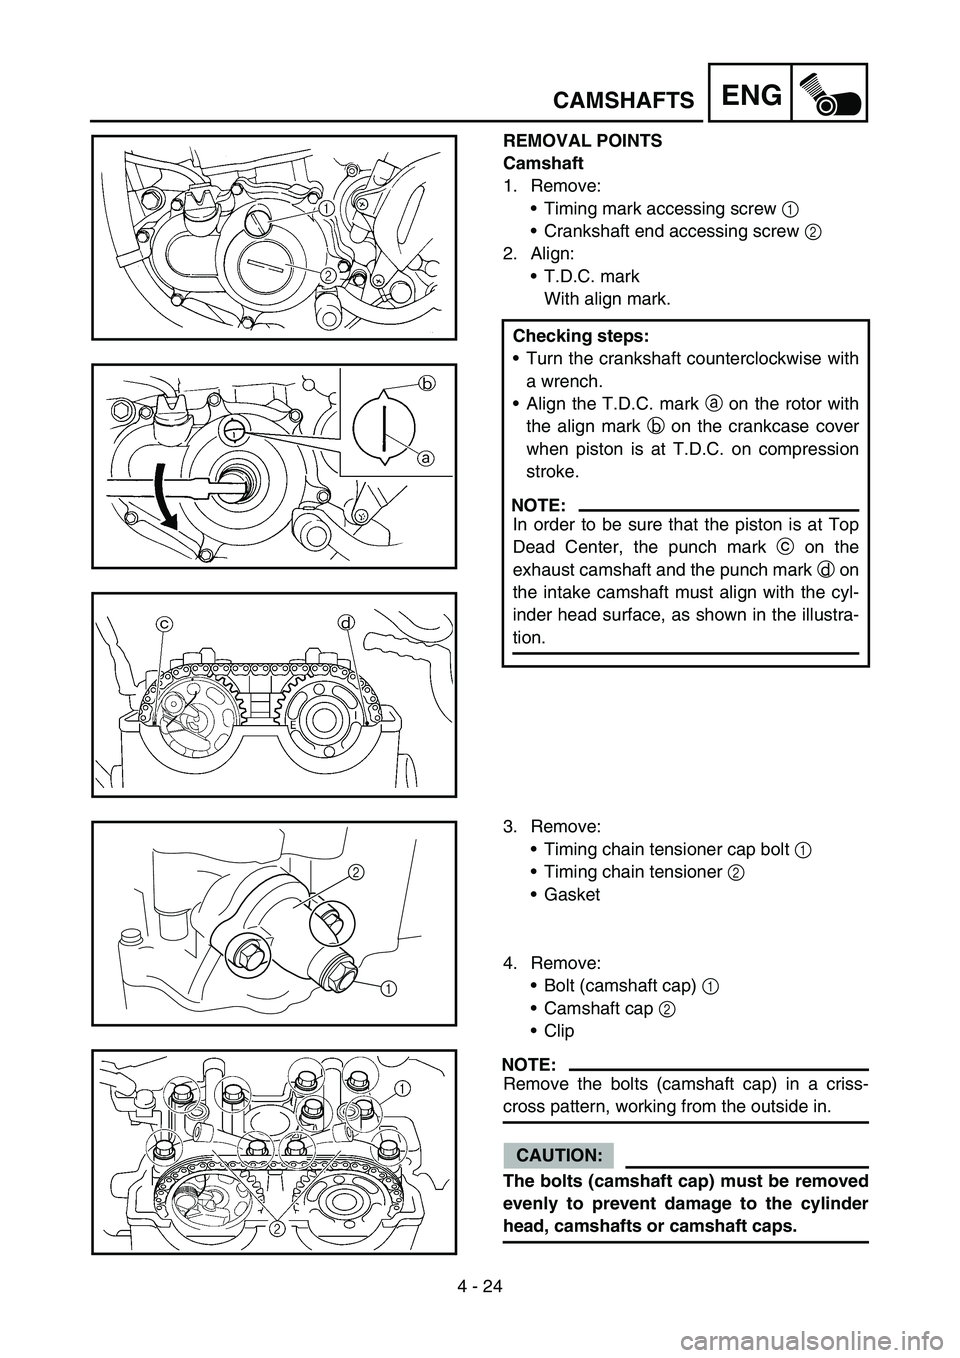 YAMAHA YZ250F 2007  Owners Manual 4 - 24
ENGCAMSHAFTS
REMOVAL POINTS
Camshaft
1. Remove:
Timing mark accessing screw 1 
Crankshaft end accessing screw 2 
2. Align:
T.D.C. mark
With align mark.
Checking steps:
Turn the crankshaft c